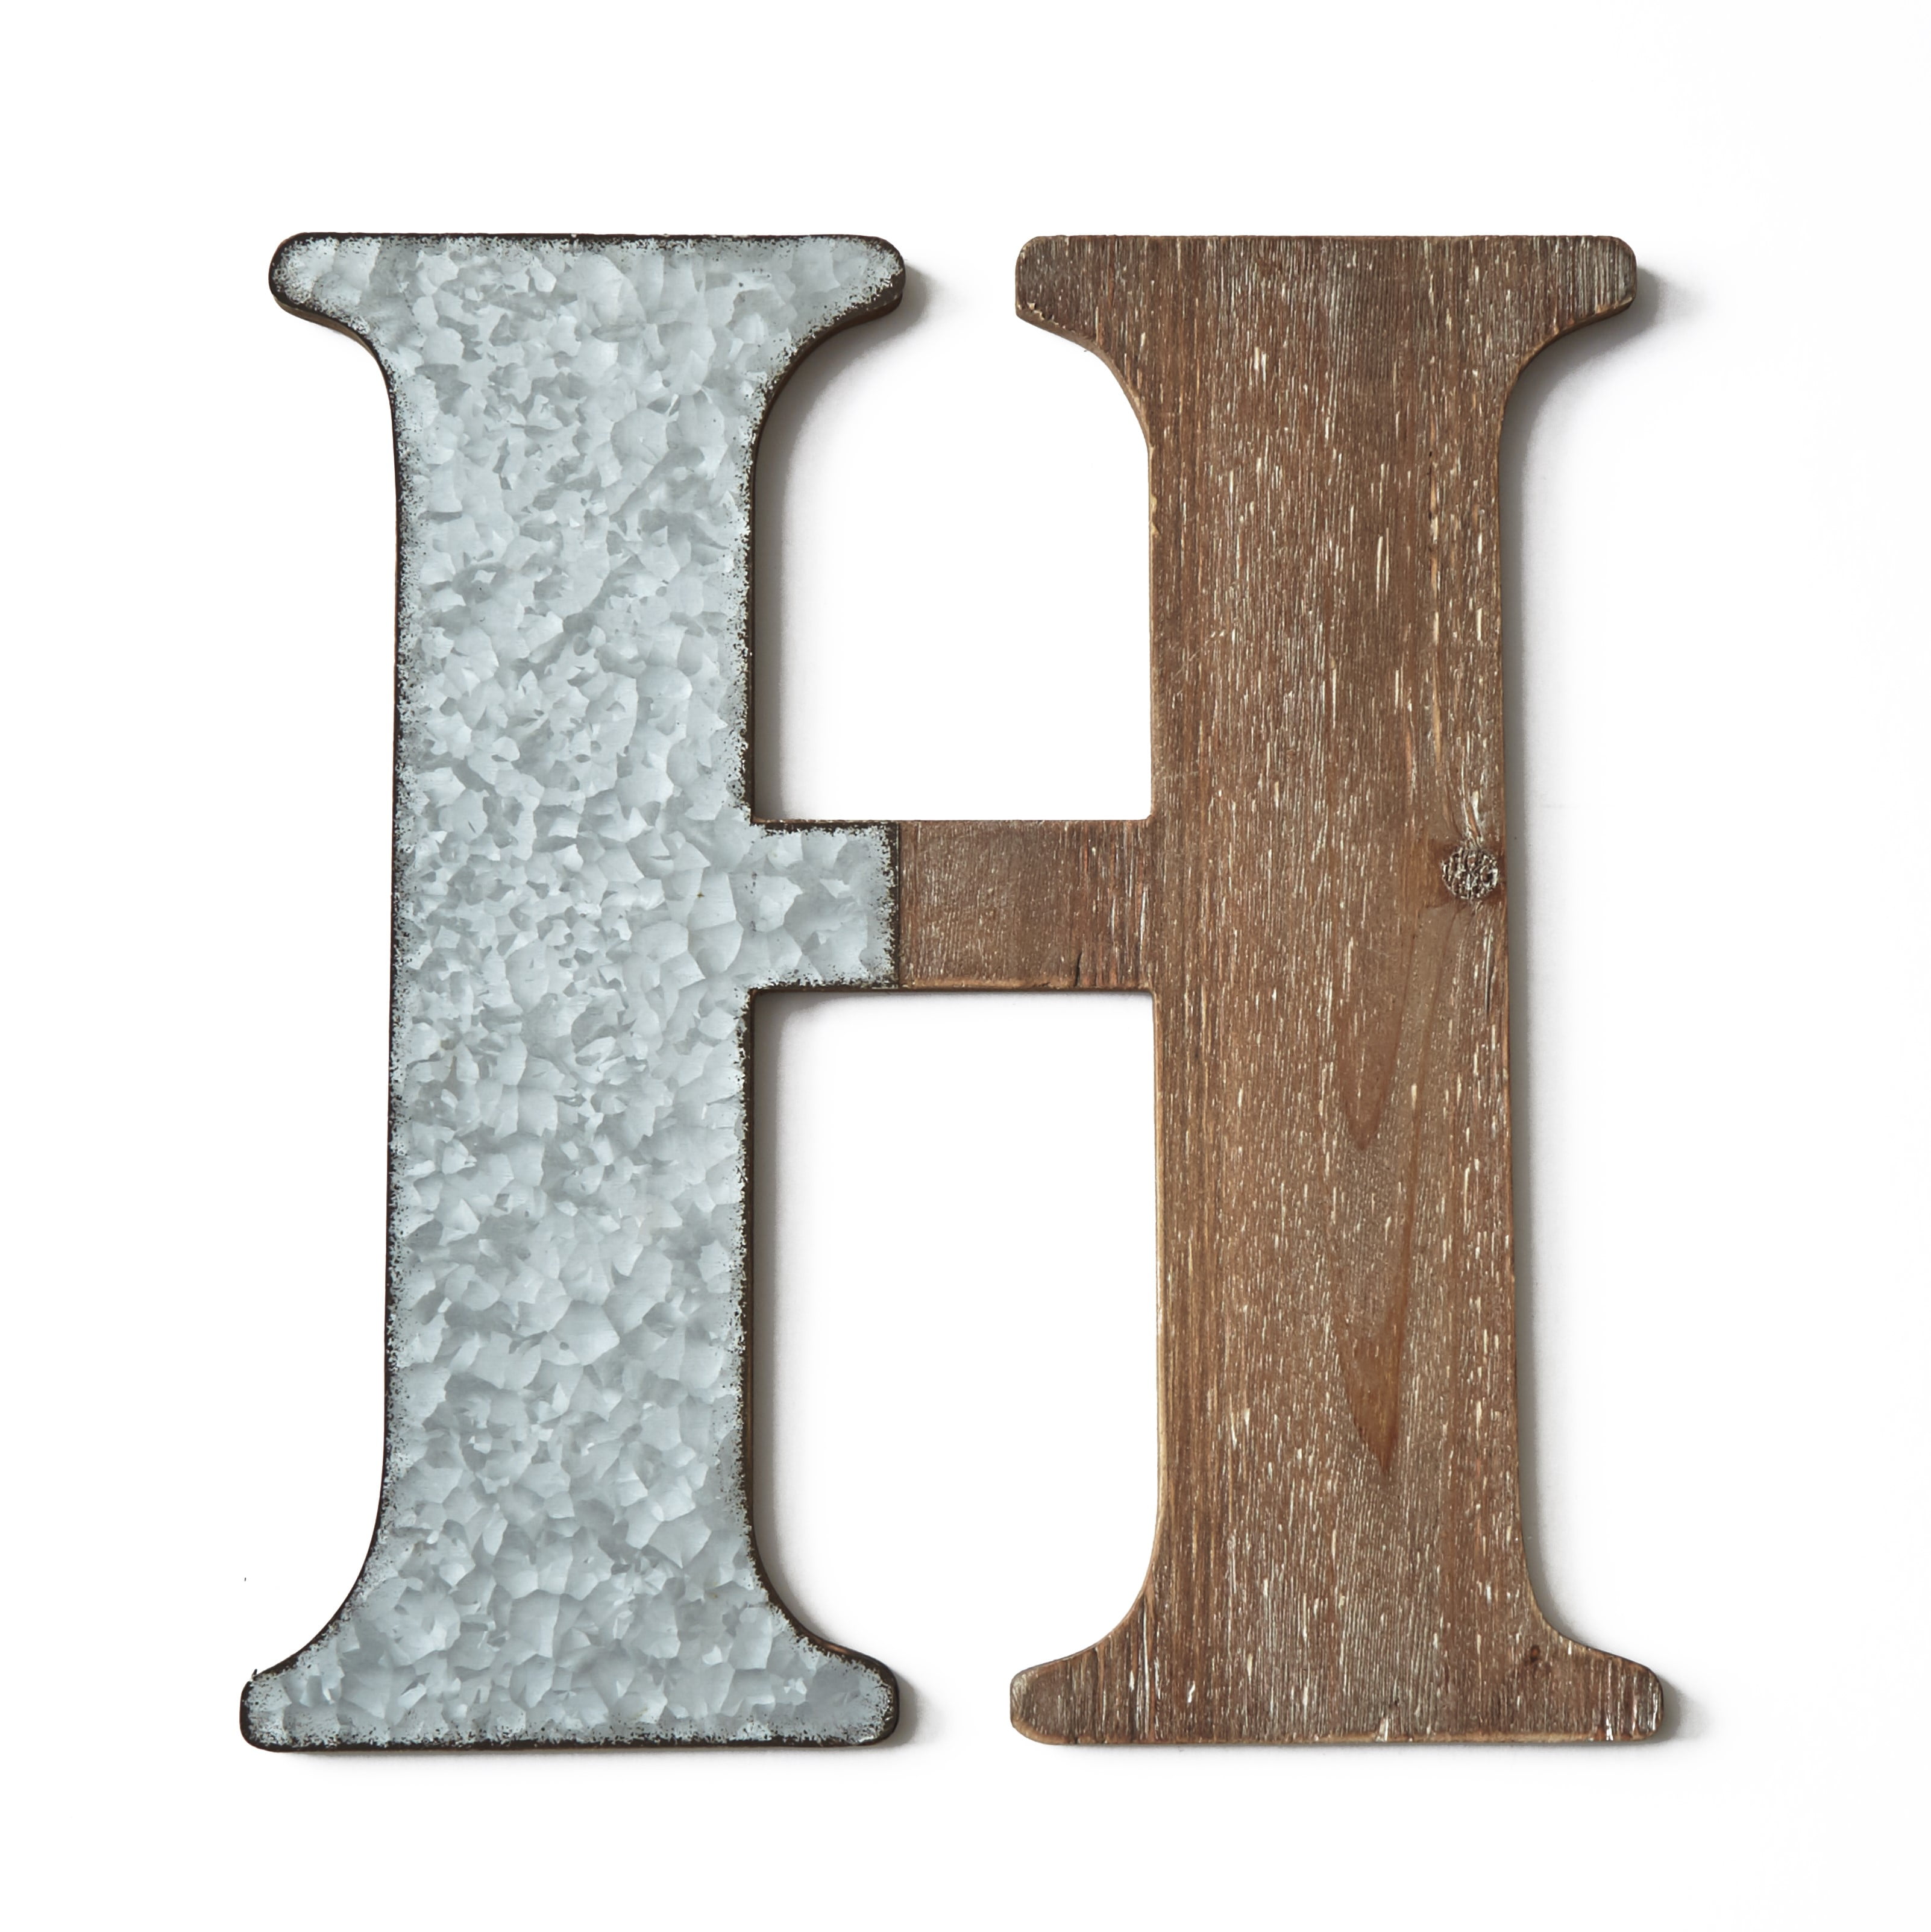 Wood & Metal Wall Letters - Decorative Galvanized Rustic ...